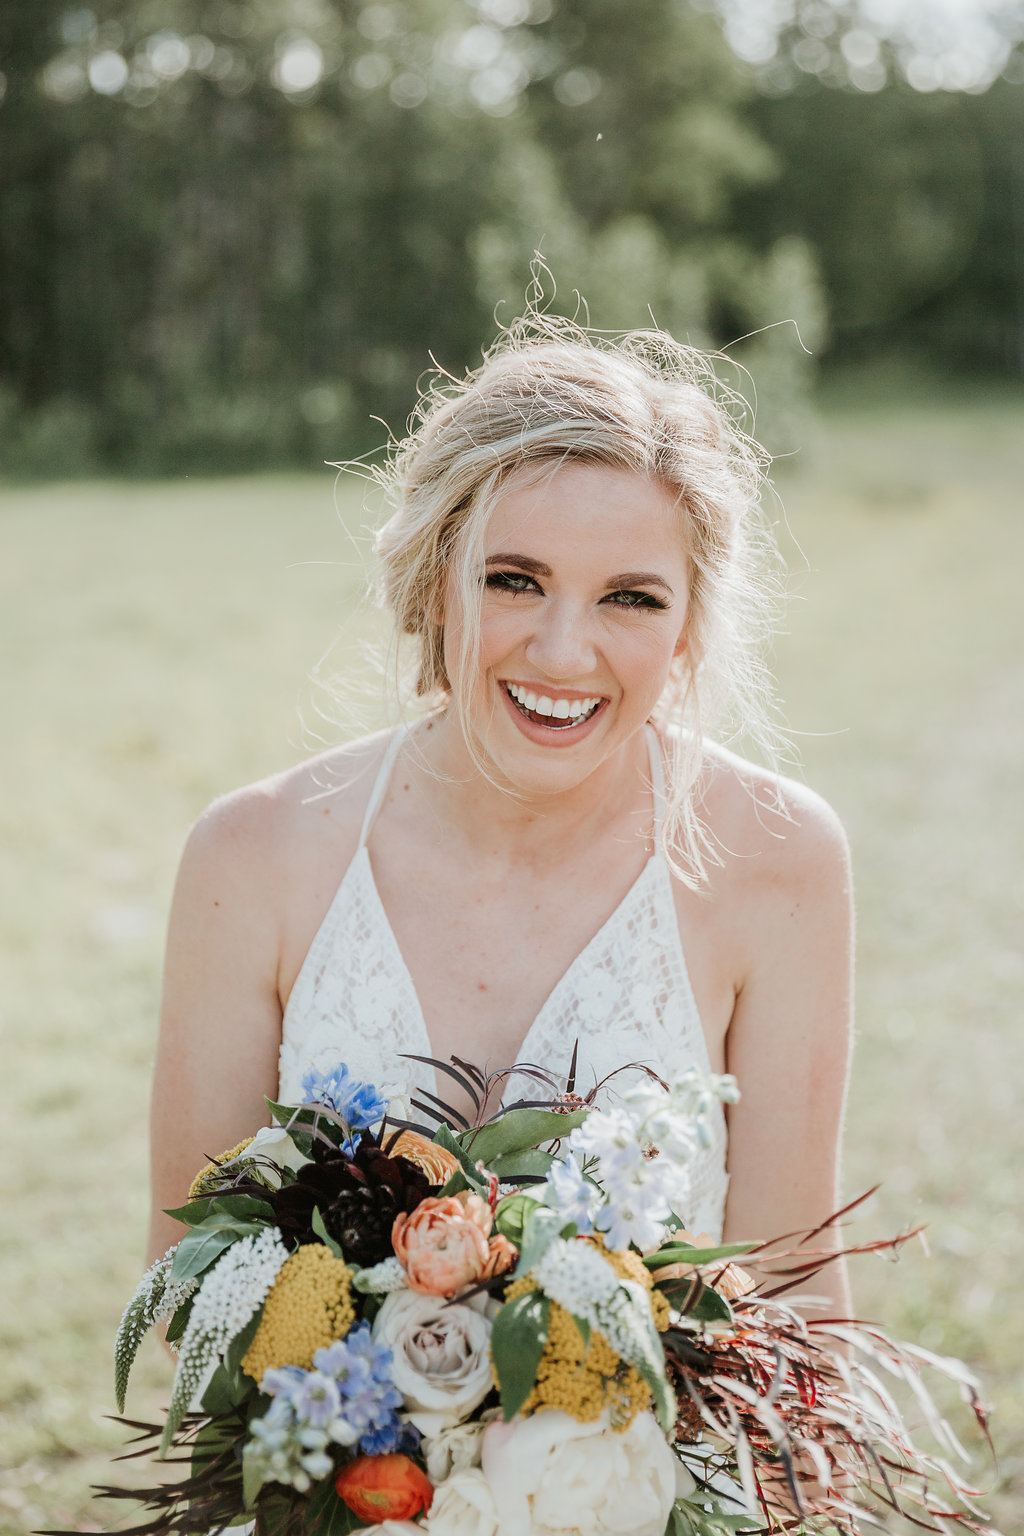 Intimate Farmyard Wedding Inspiration // Eclectic and Vintage Elopement Dripping With Jewel-Toned Decor - Bronte Bride